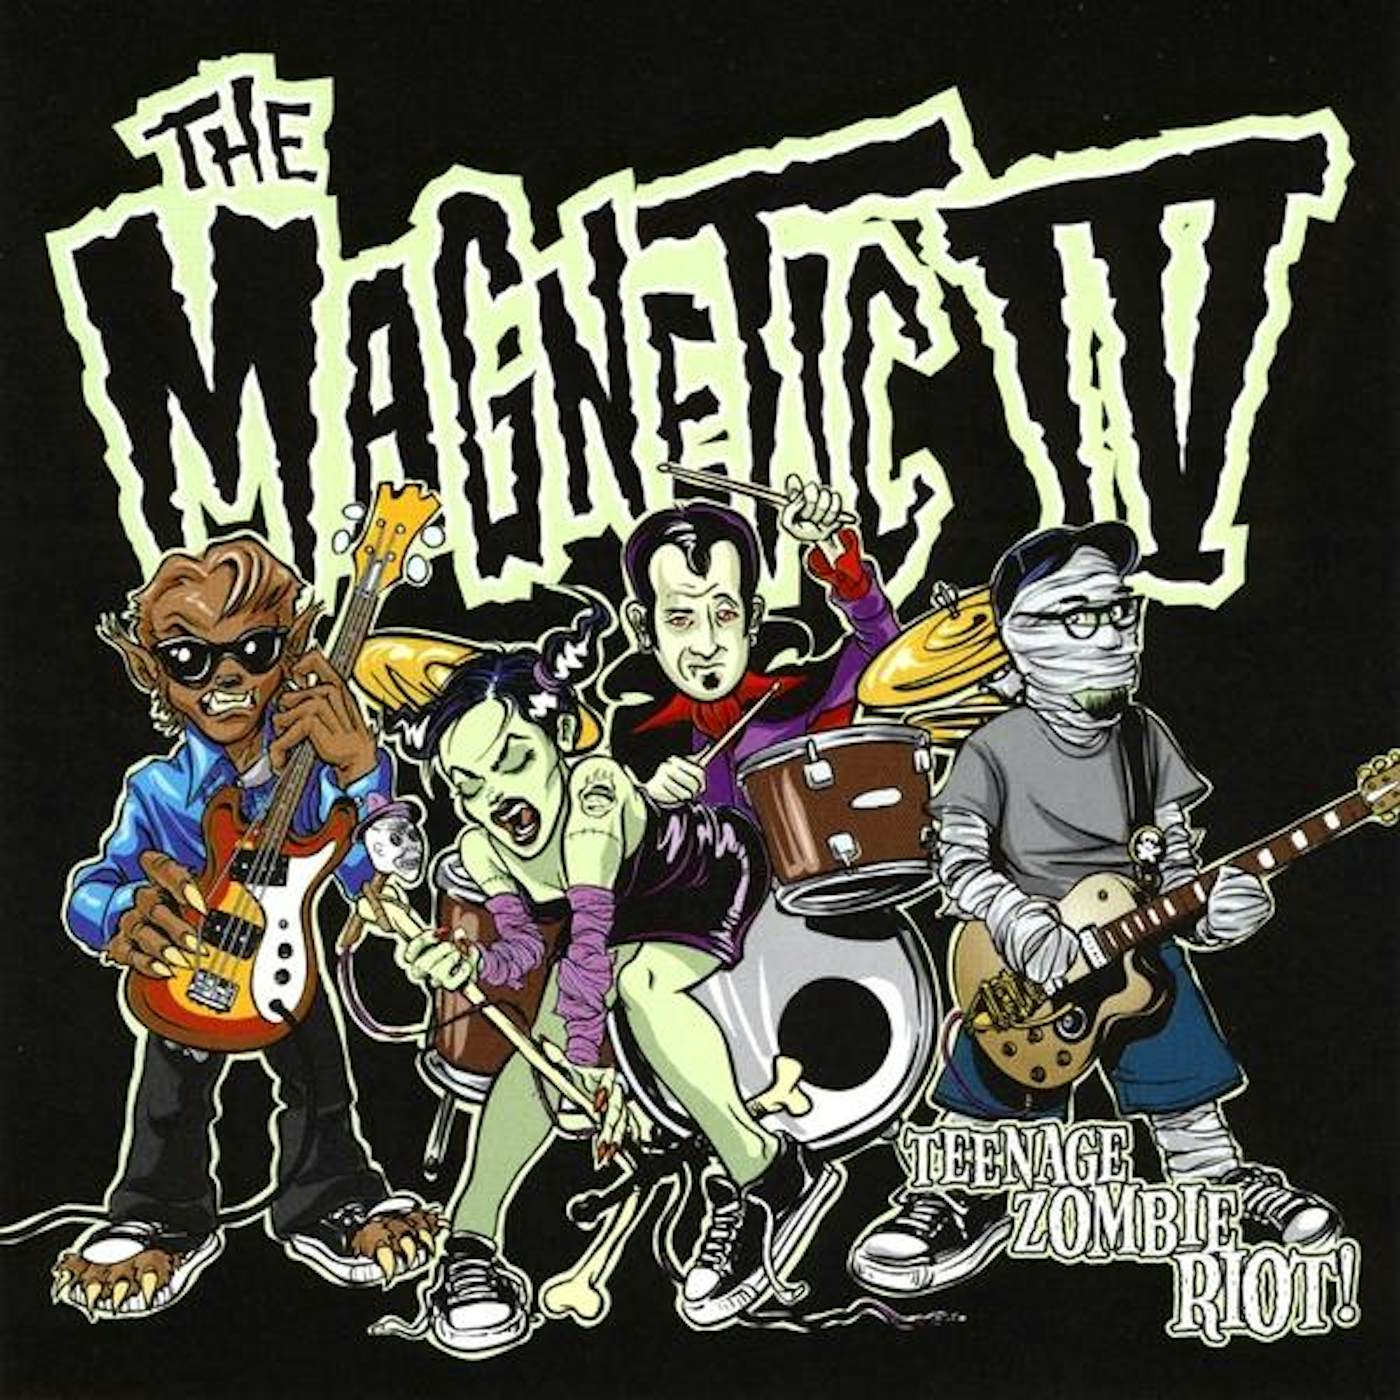 Magnetic 4 TEENAGE ZOMBIE RIOT CD